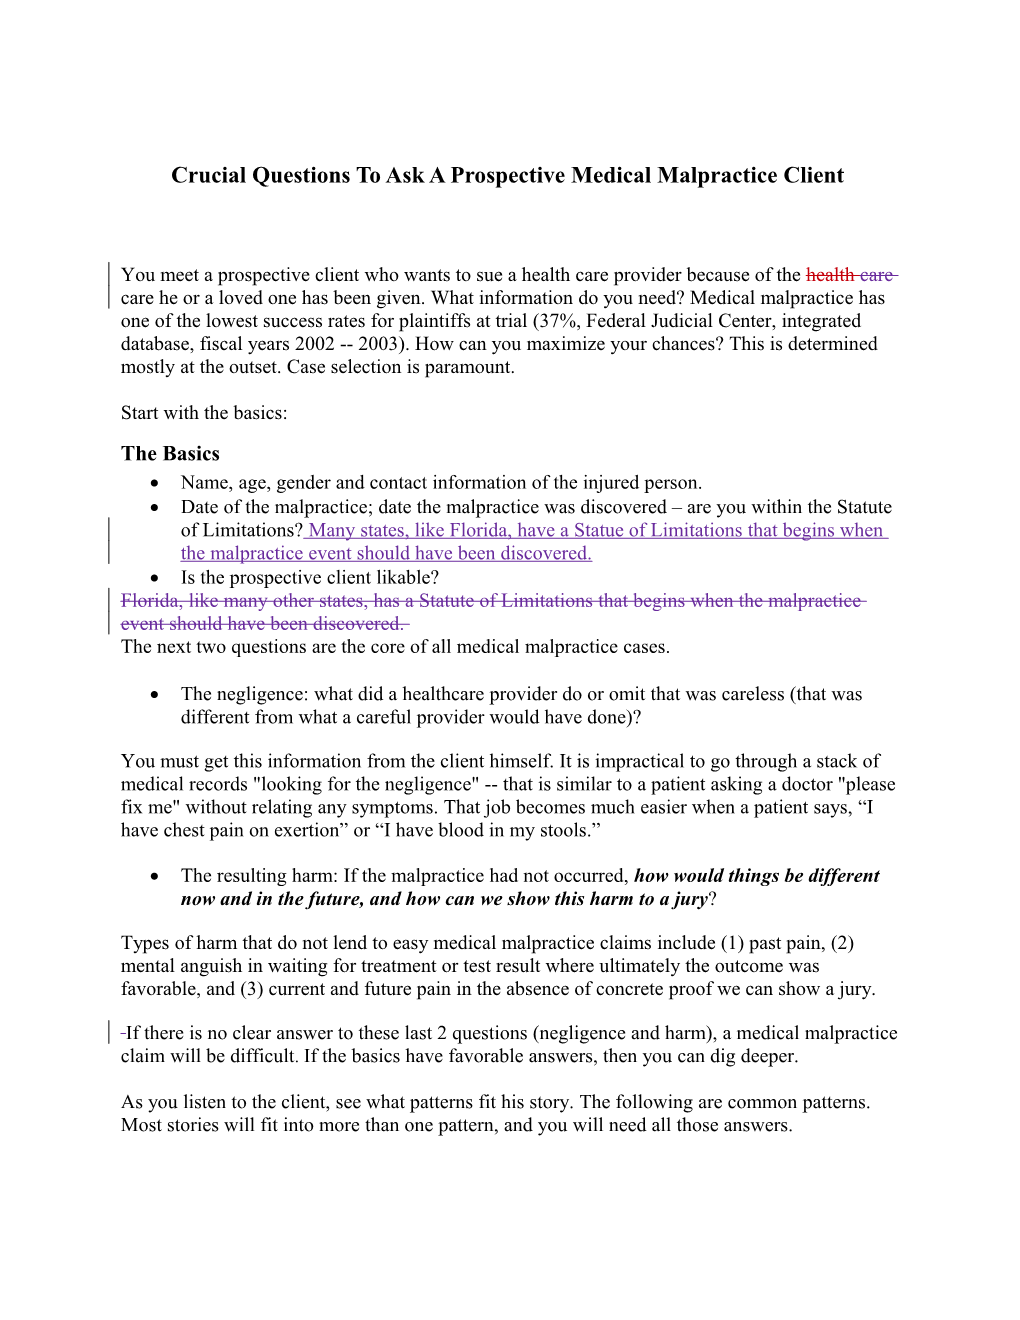 Crucial Questions to Ask a Prospective Medical Malpractice Client